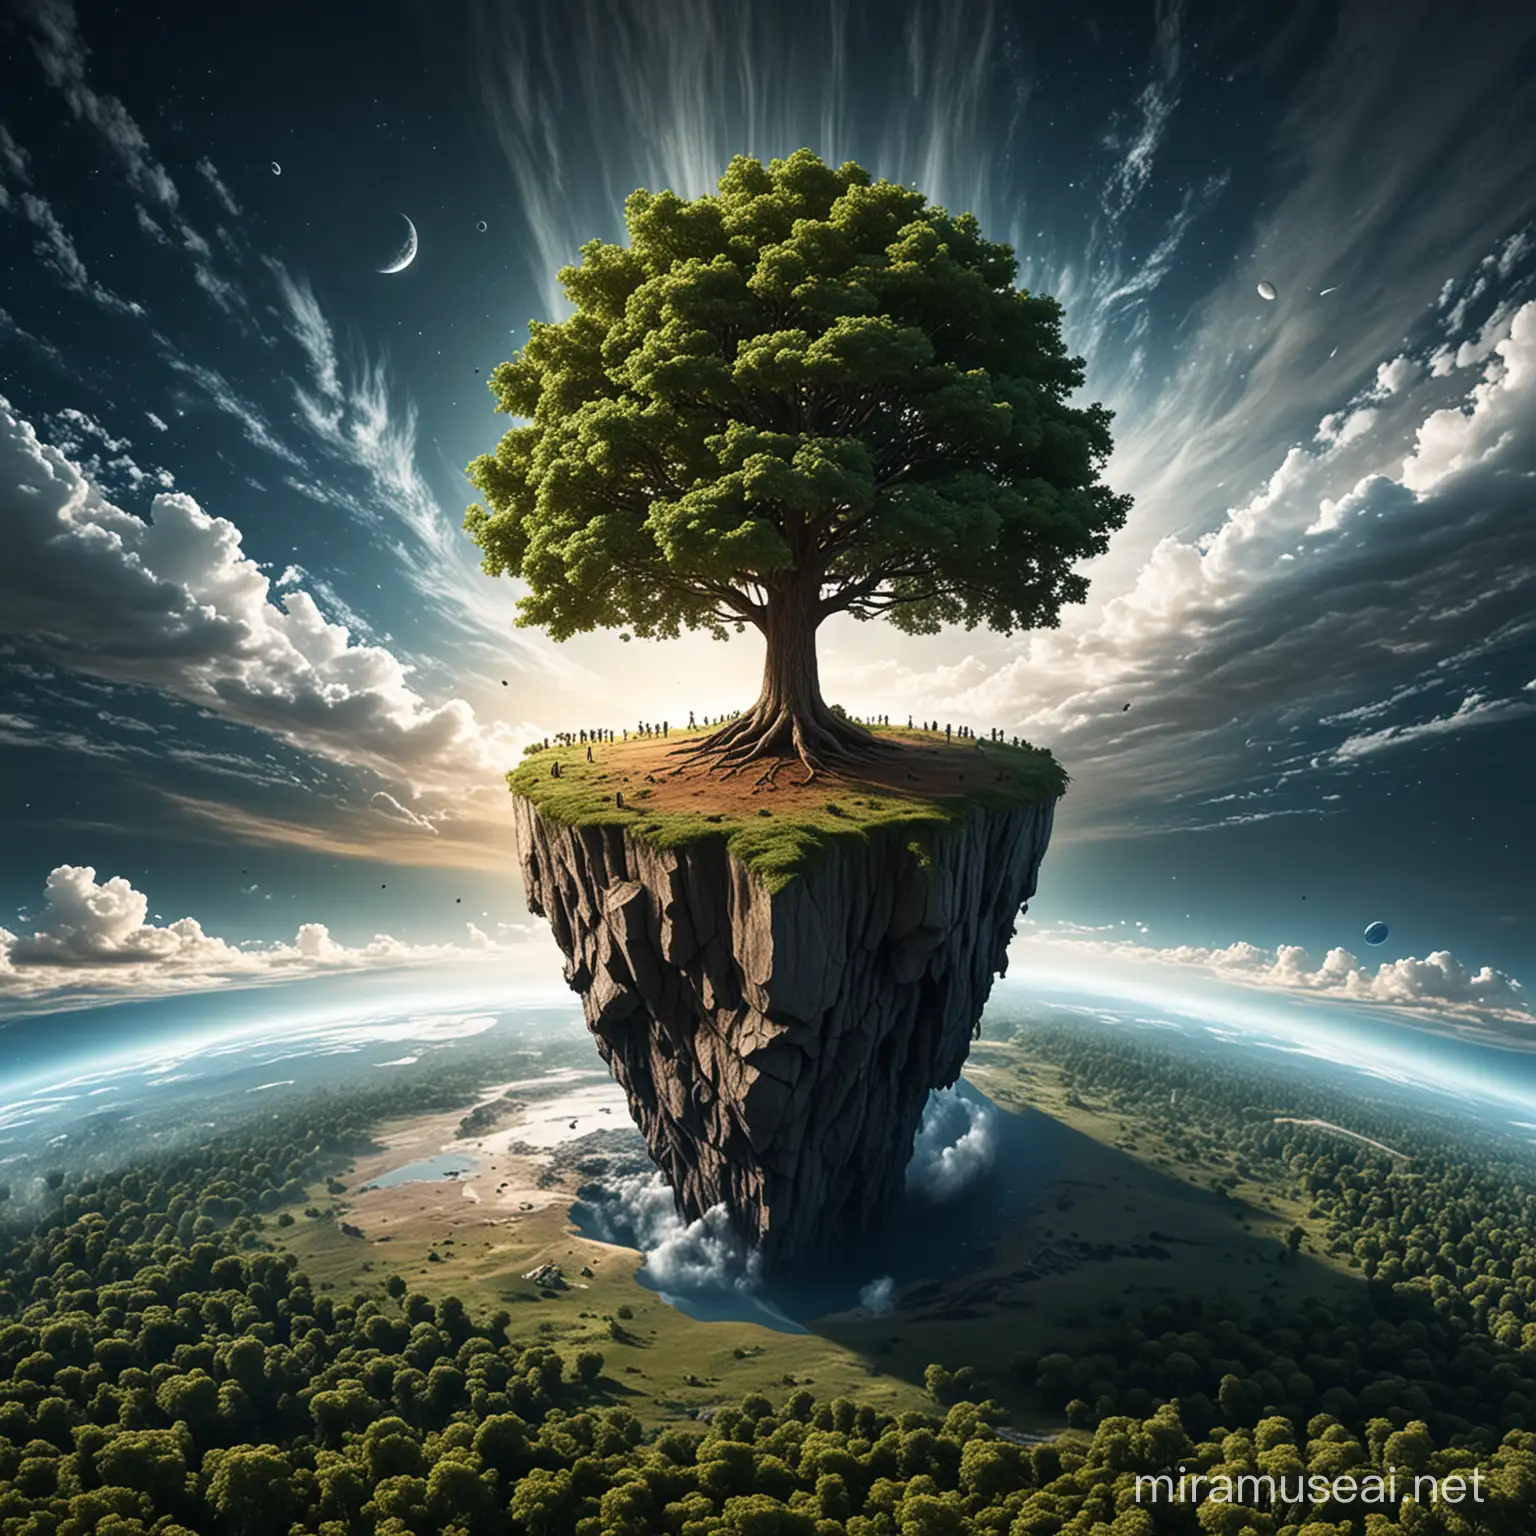 3D Earth Manipulation with Giant Tree Environmental Artwork Concept